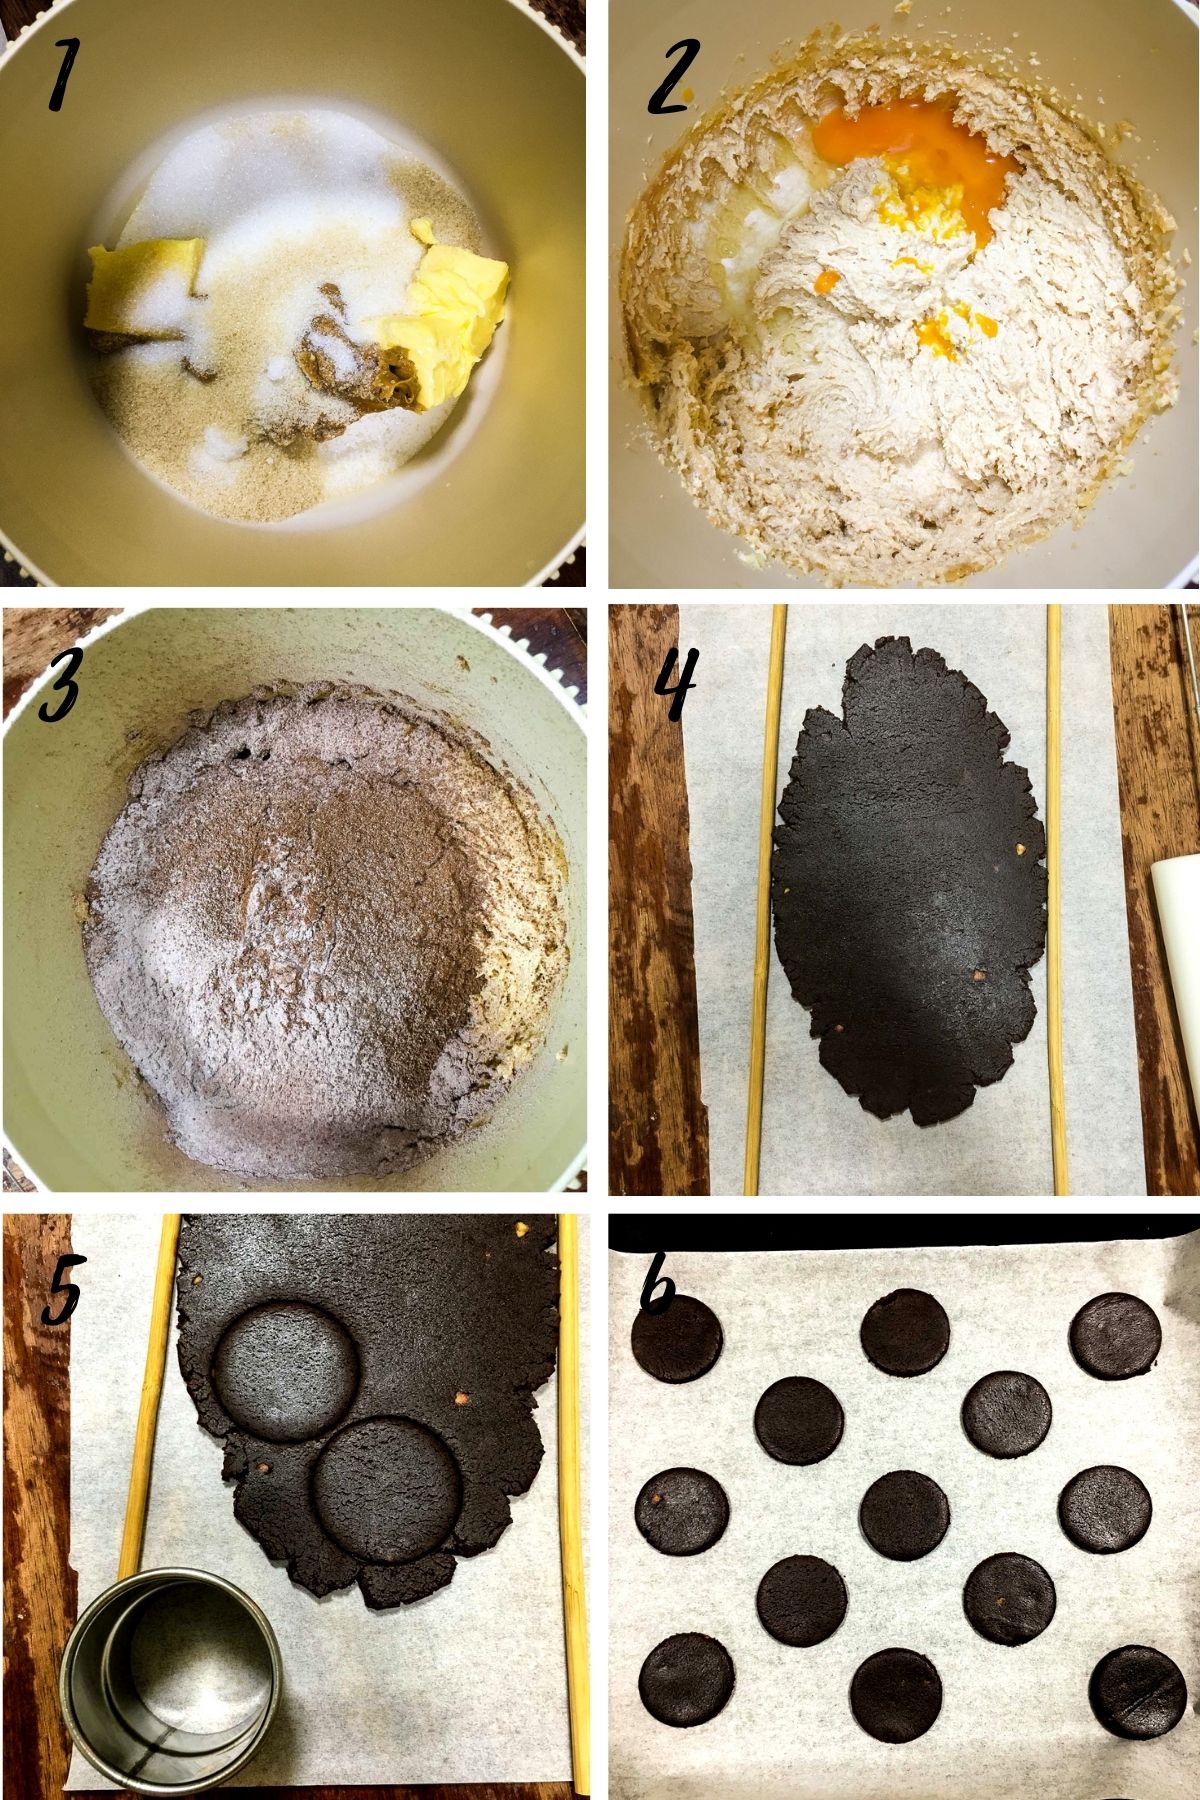 A poster of 6 images showing how to make chocolate cookies.